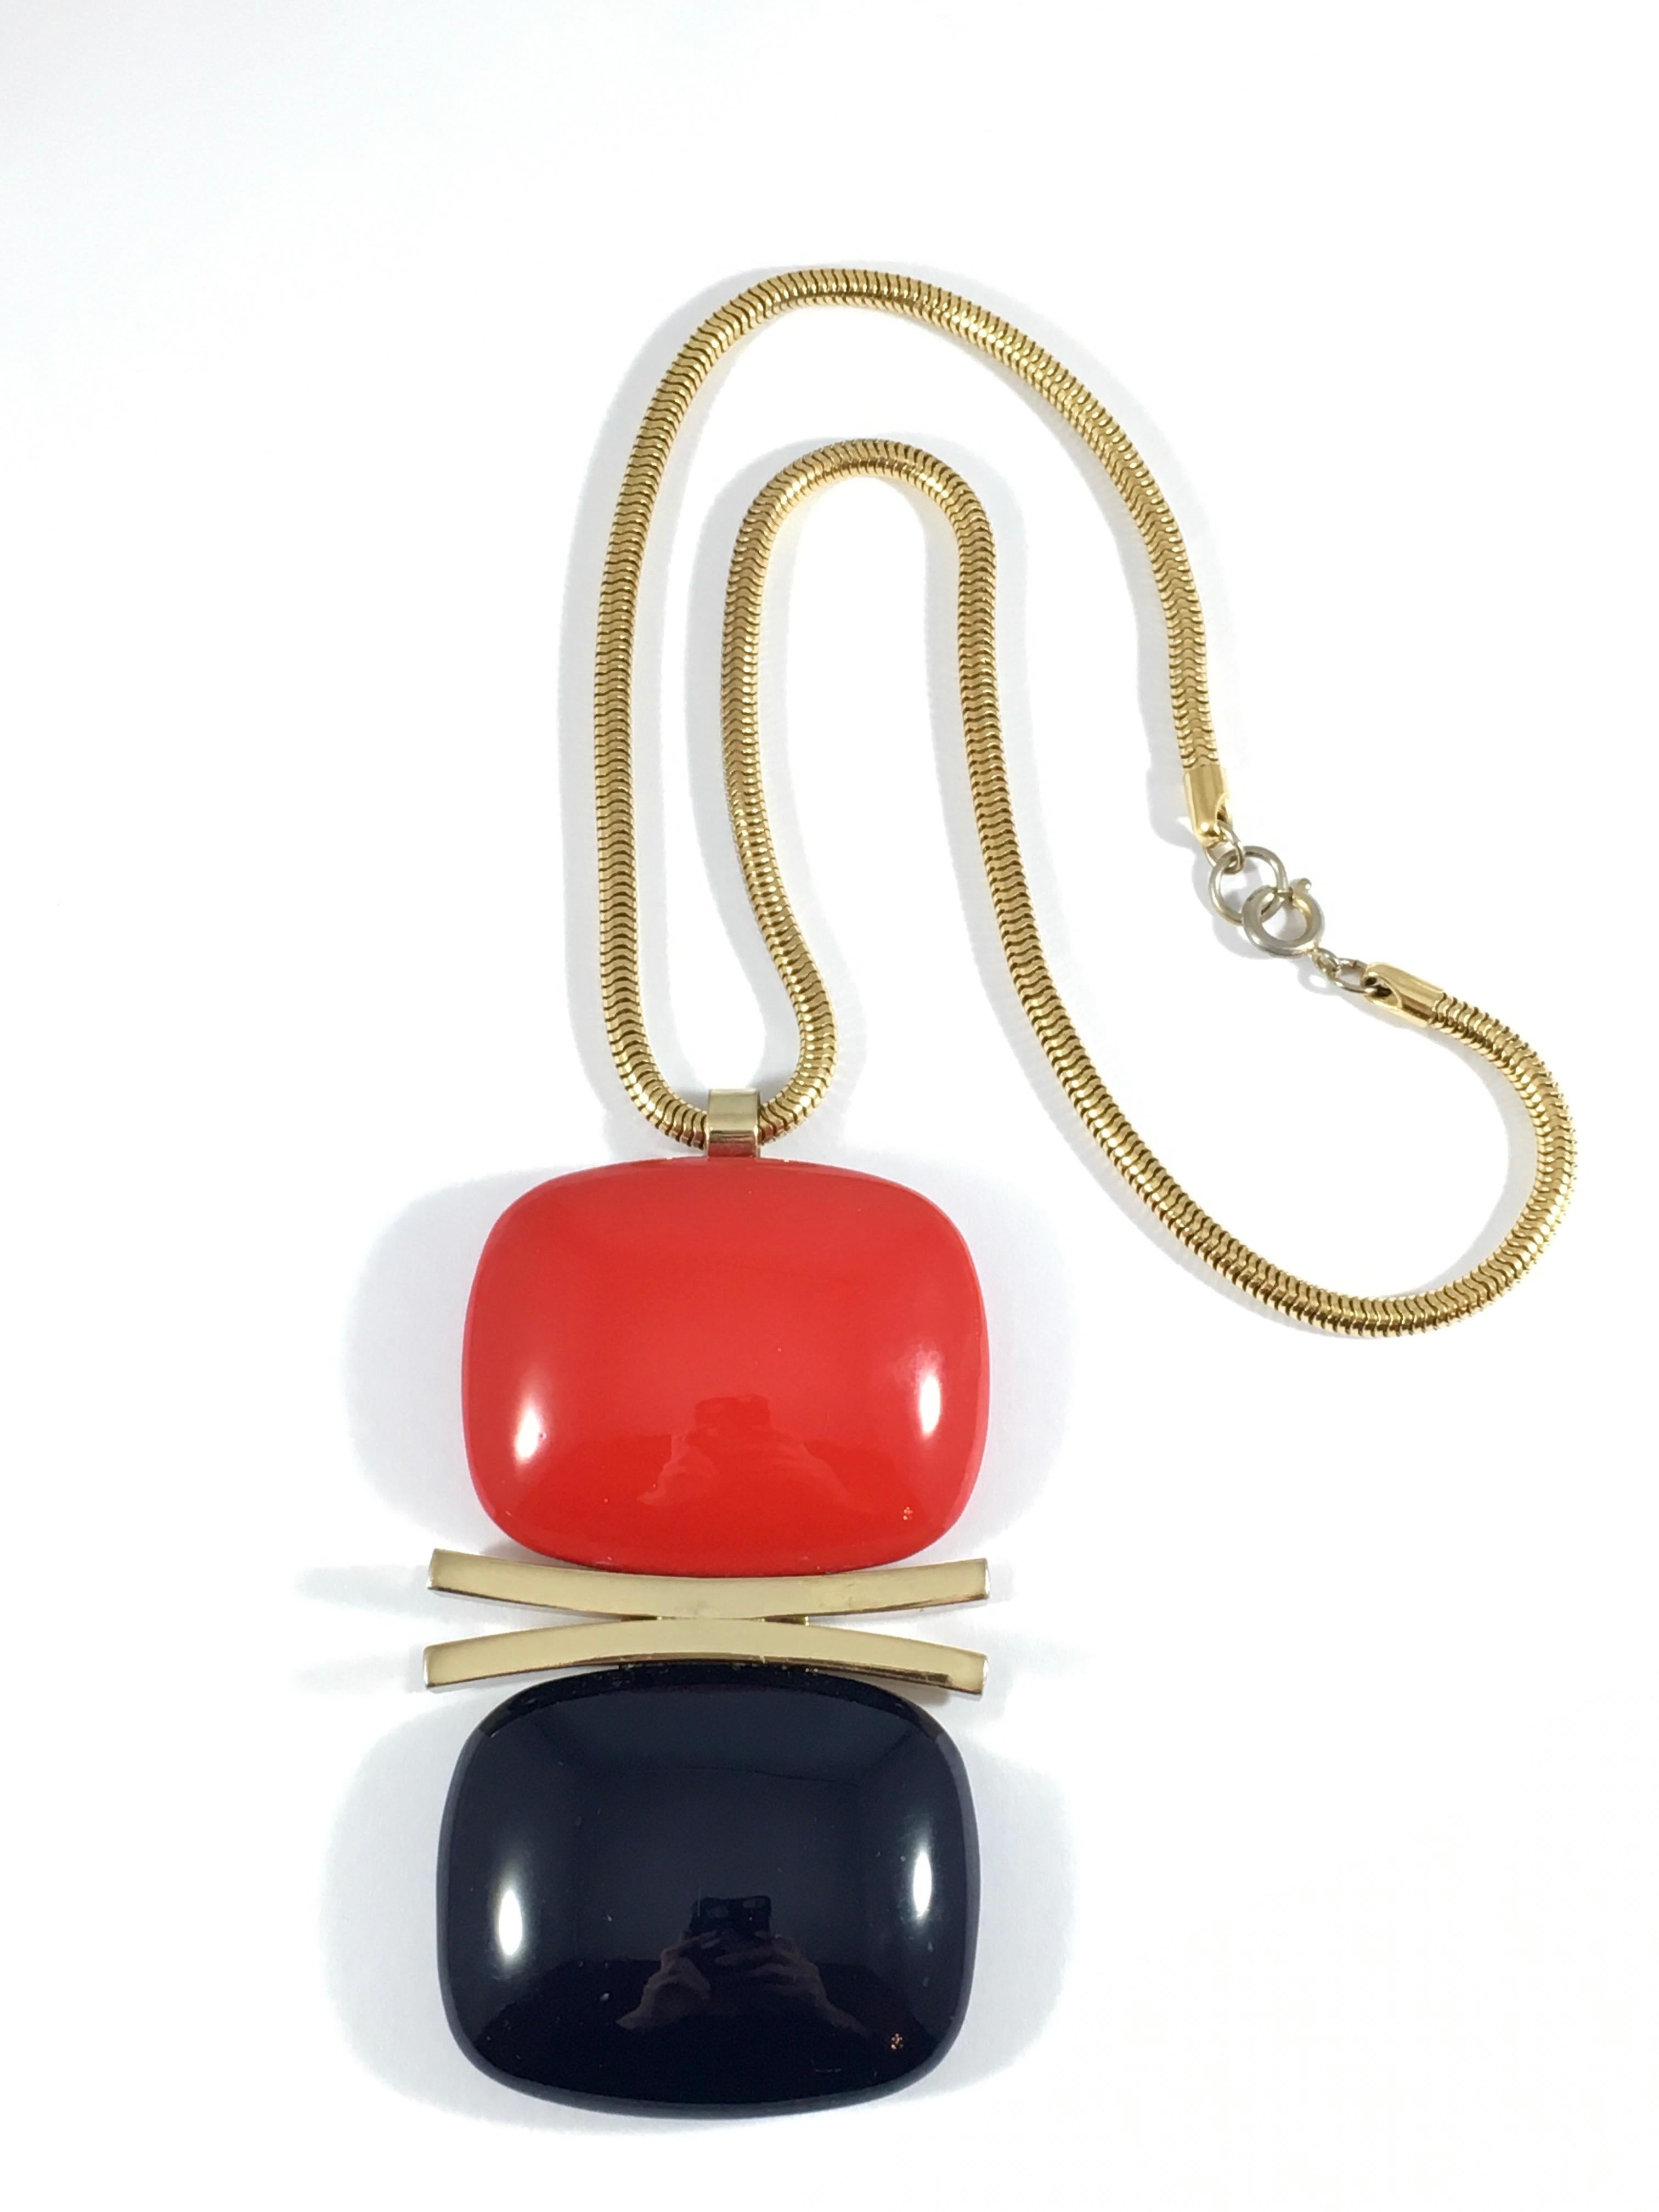 This is a fabulous red and navy Lanvin pendant necklace from the late 1960s/early 1970s. The large pendant is made out of a substantial resin and hangs from a goldtone 19 inch long snake chain. The pendant measures 4 1/2 inches long including the